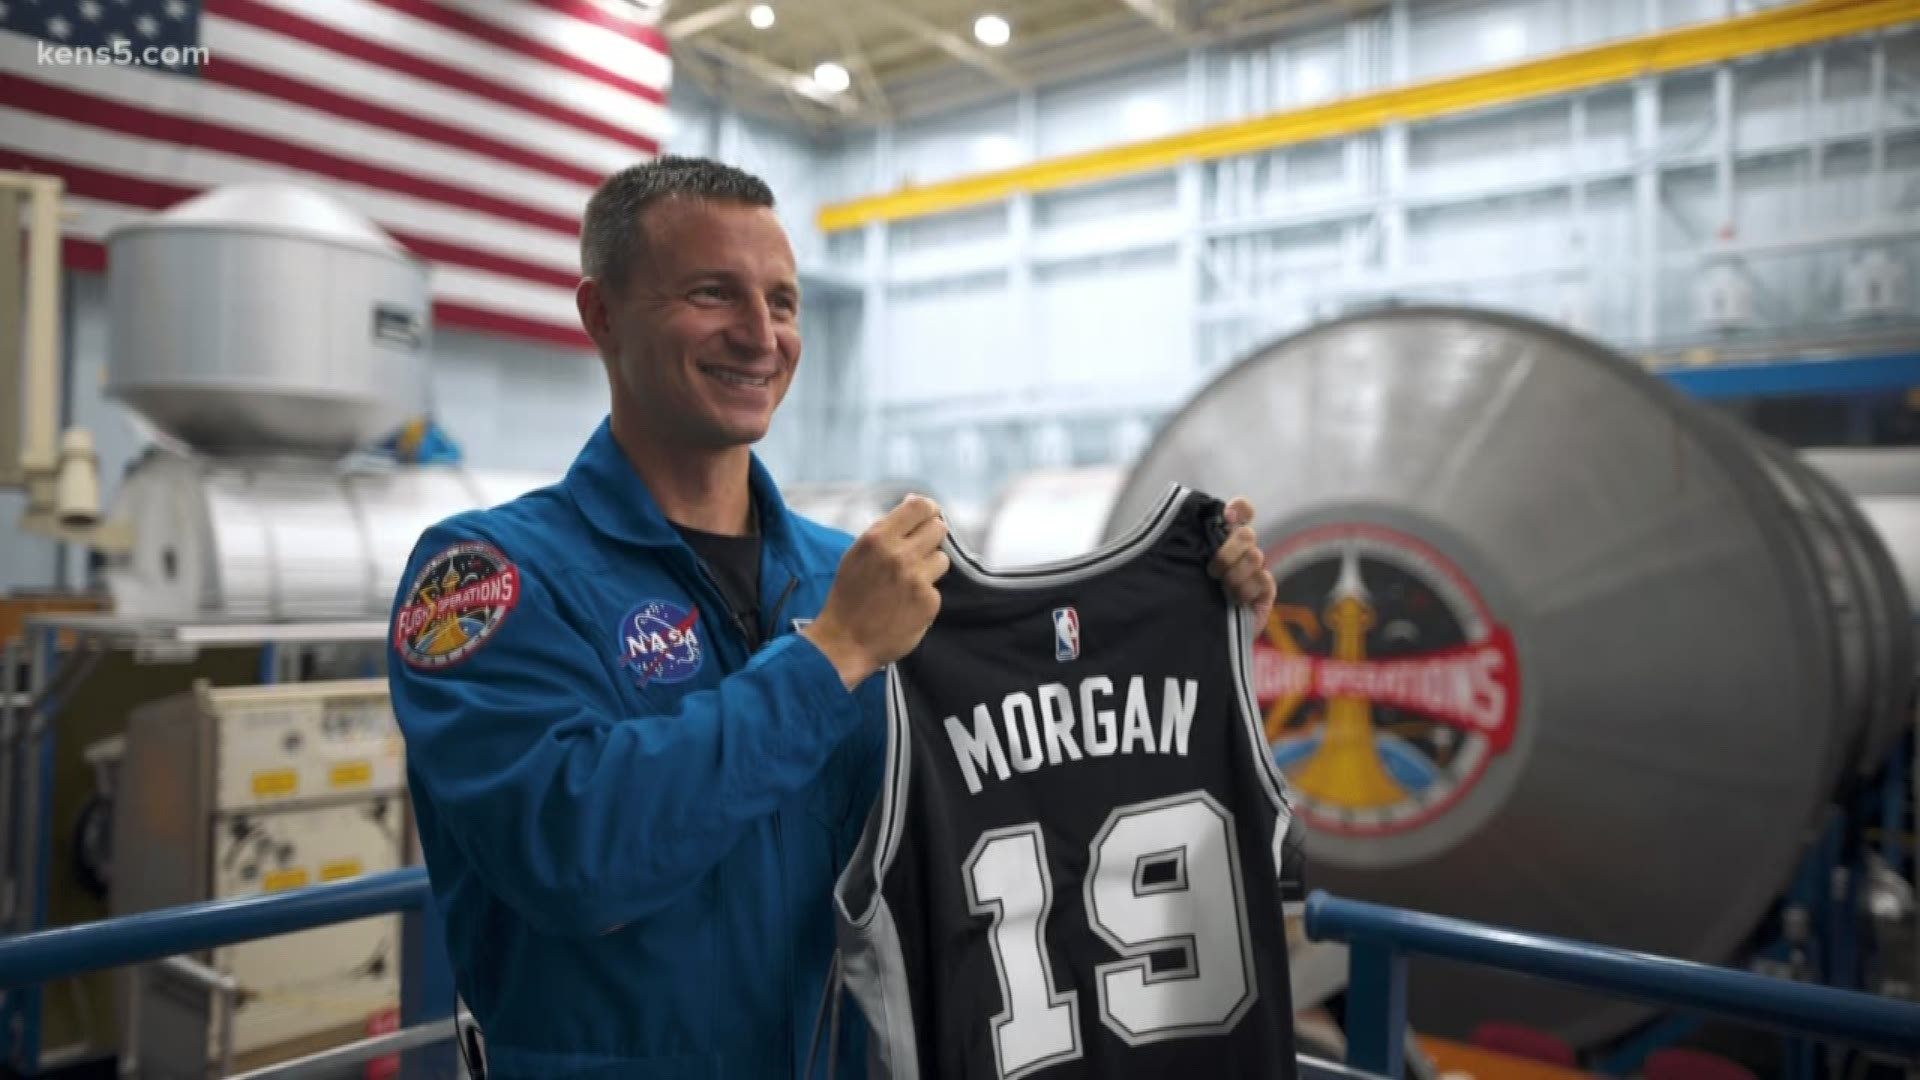 They will soon all have been visitors to space, after a NASA astronaut packs a San Antonio jersey while launching from Earth on Saturday.